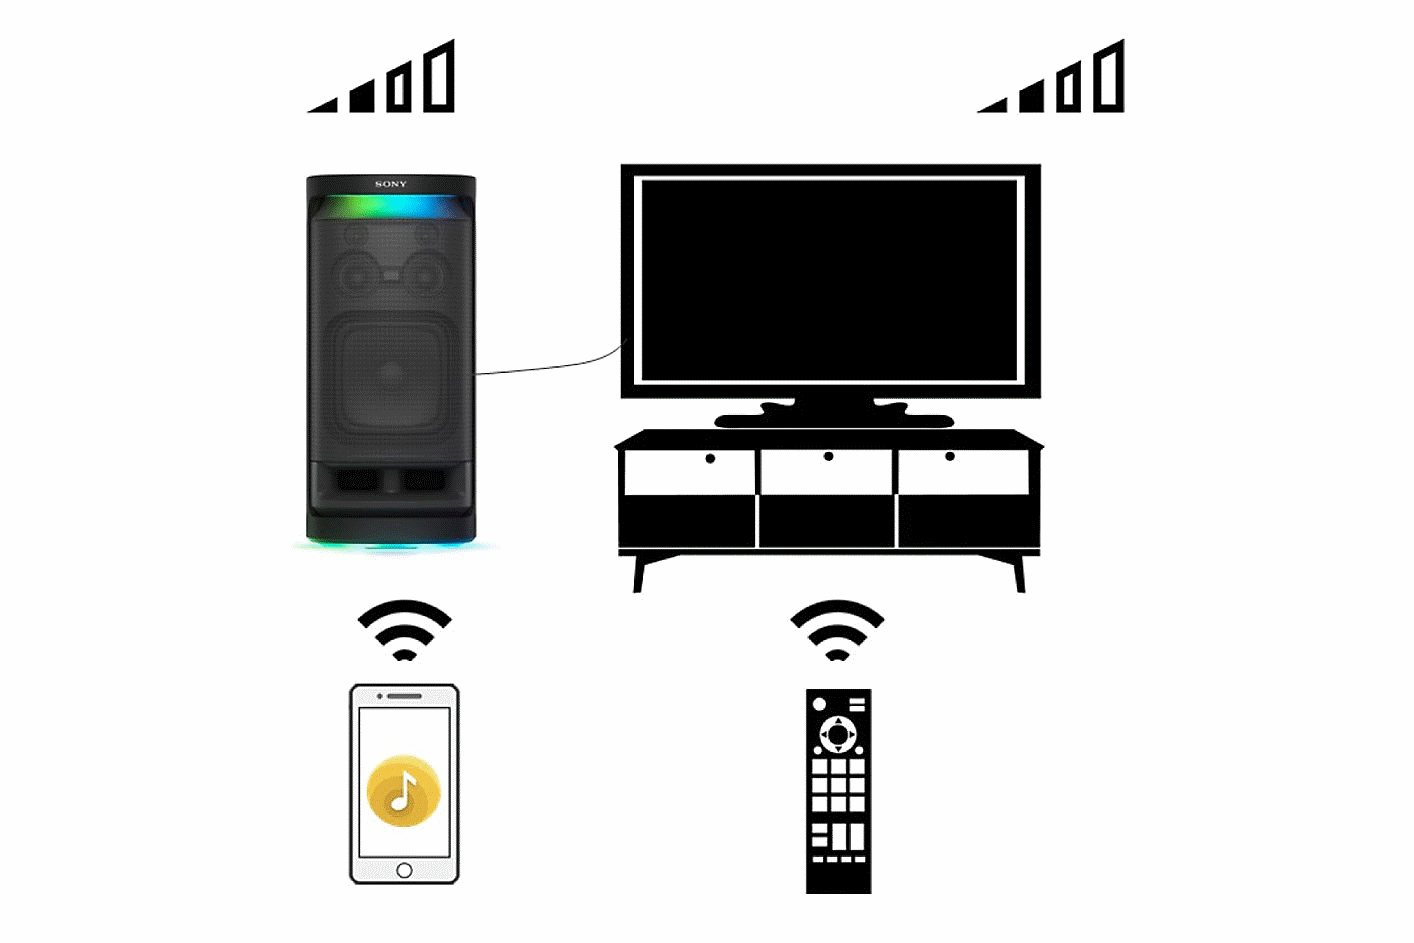 Image displaying directions on how to activate sound between the SRS-XV900 wireless speaker and TV